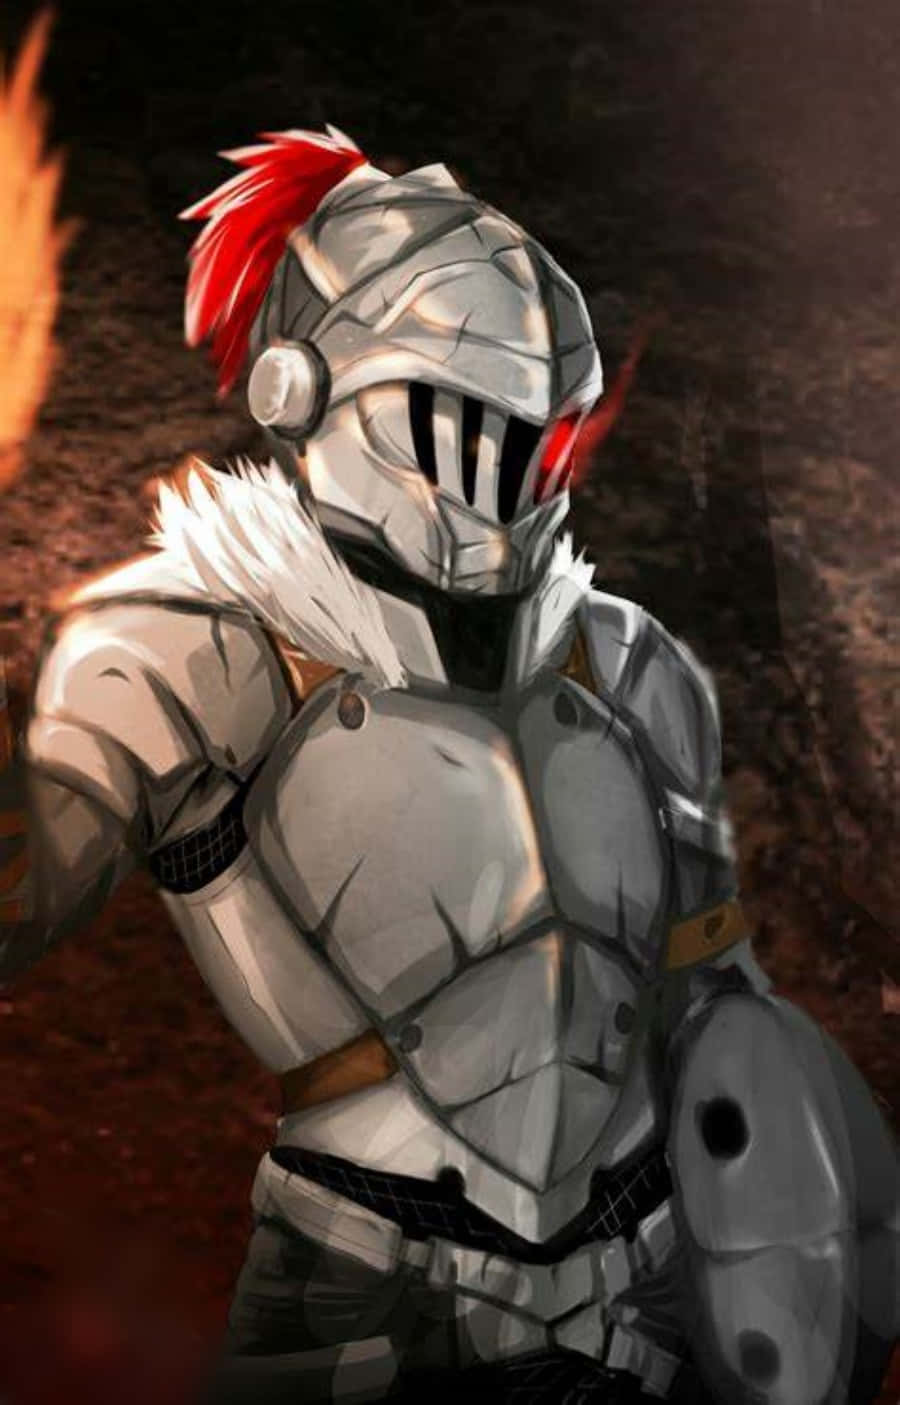 The legendary Goblin Slayer, slaying goblins and protecting the weak